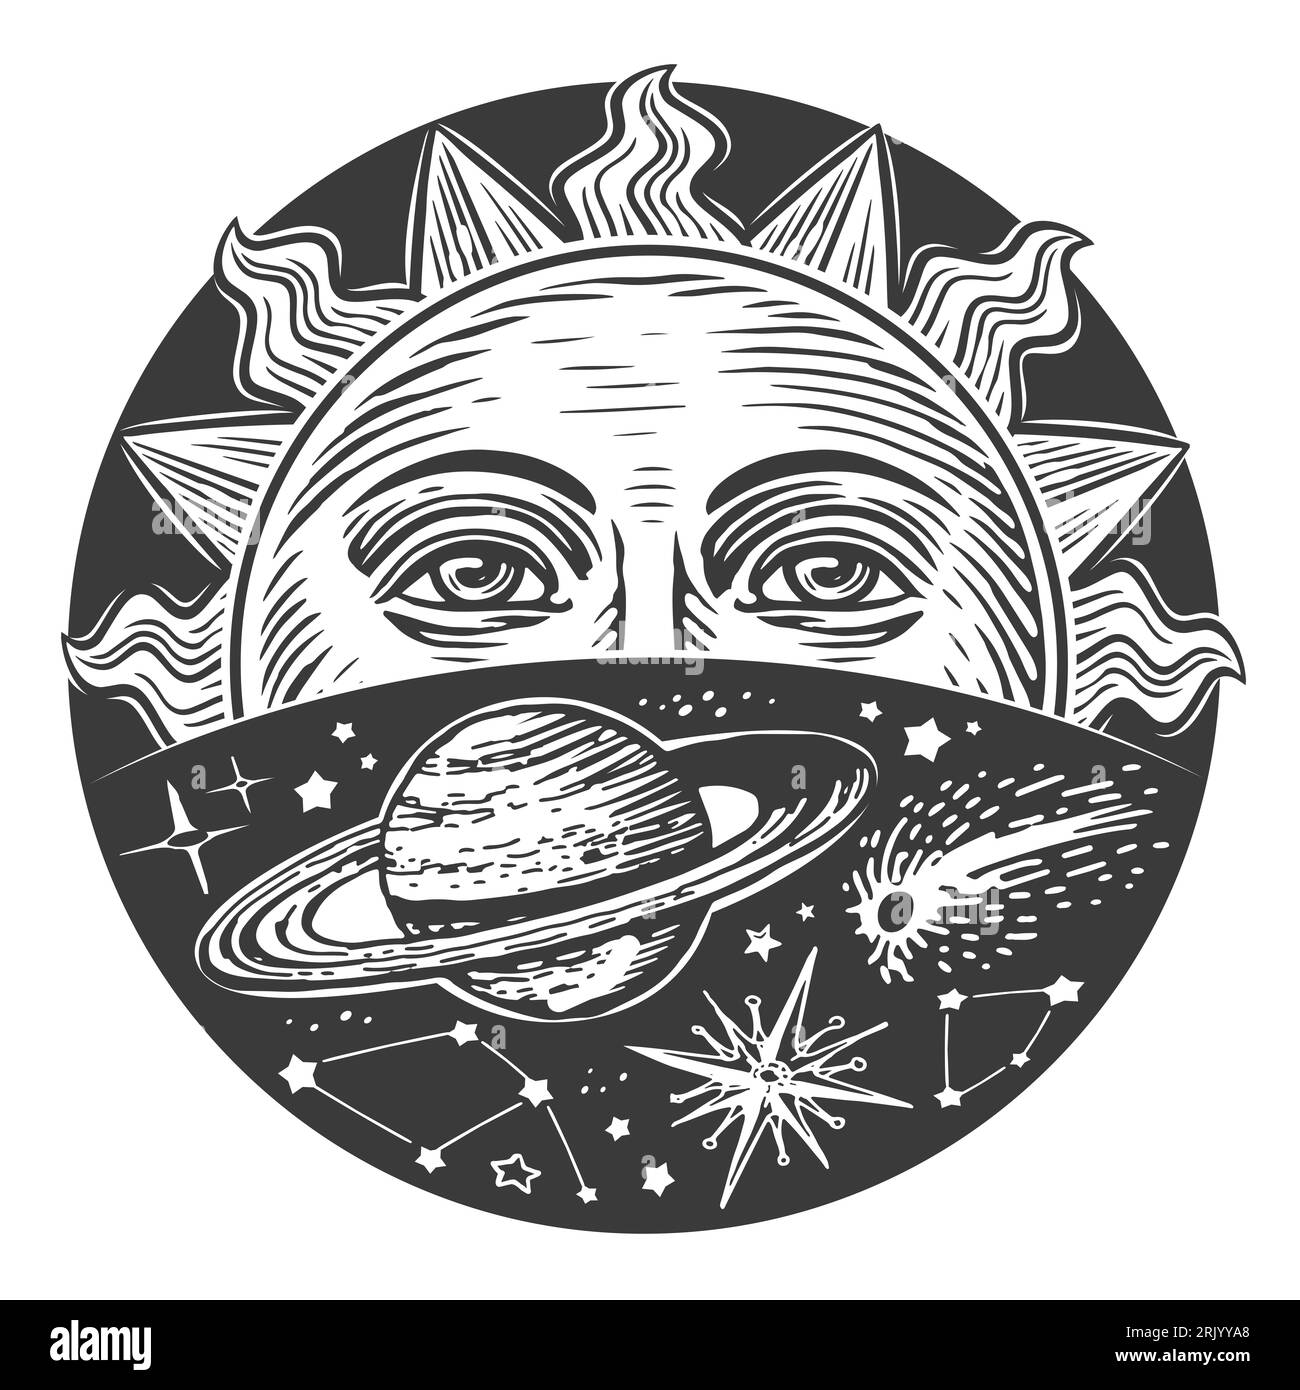 Sun with face and stars in space. Monochrome celestial print. Boho style design engraving vintage illustration Stock Photo